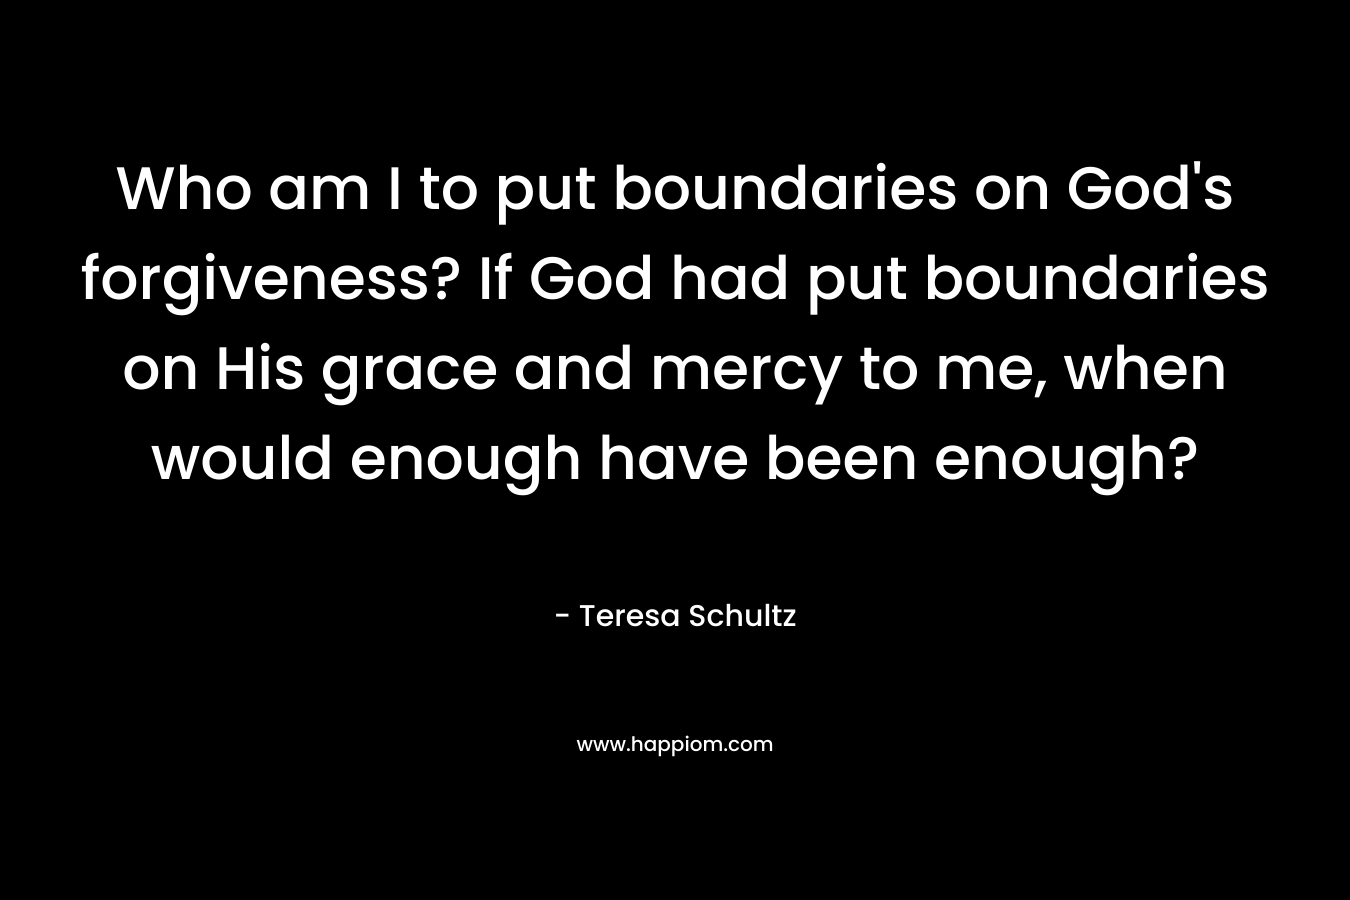 Who am I to put boundaries on God’s forgiveness? If God had put boundaries on His grace and mercy to me, when would enough have been enough? – Teresa Schultz